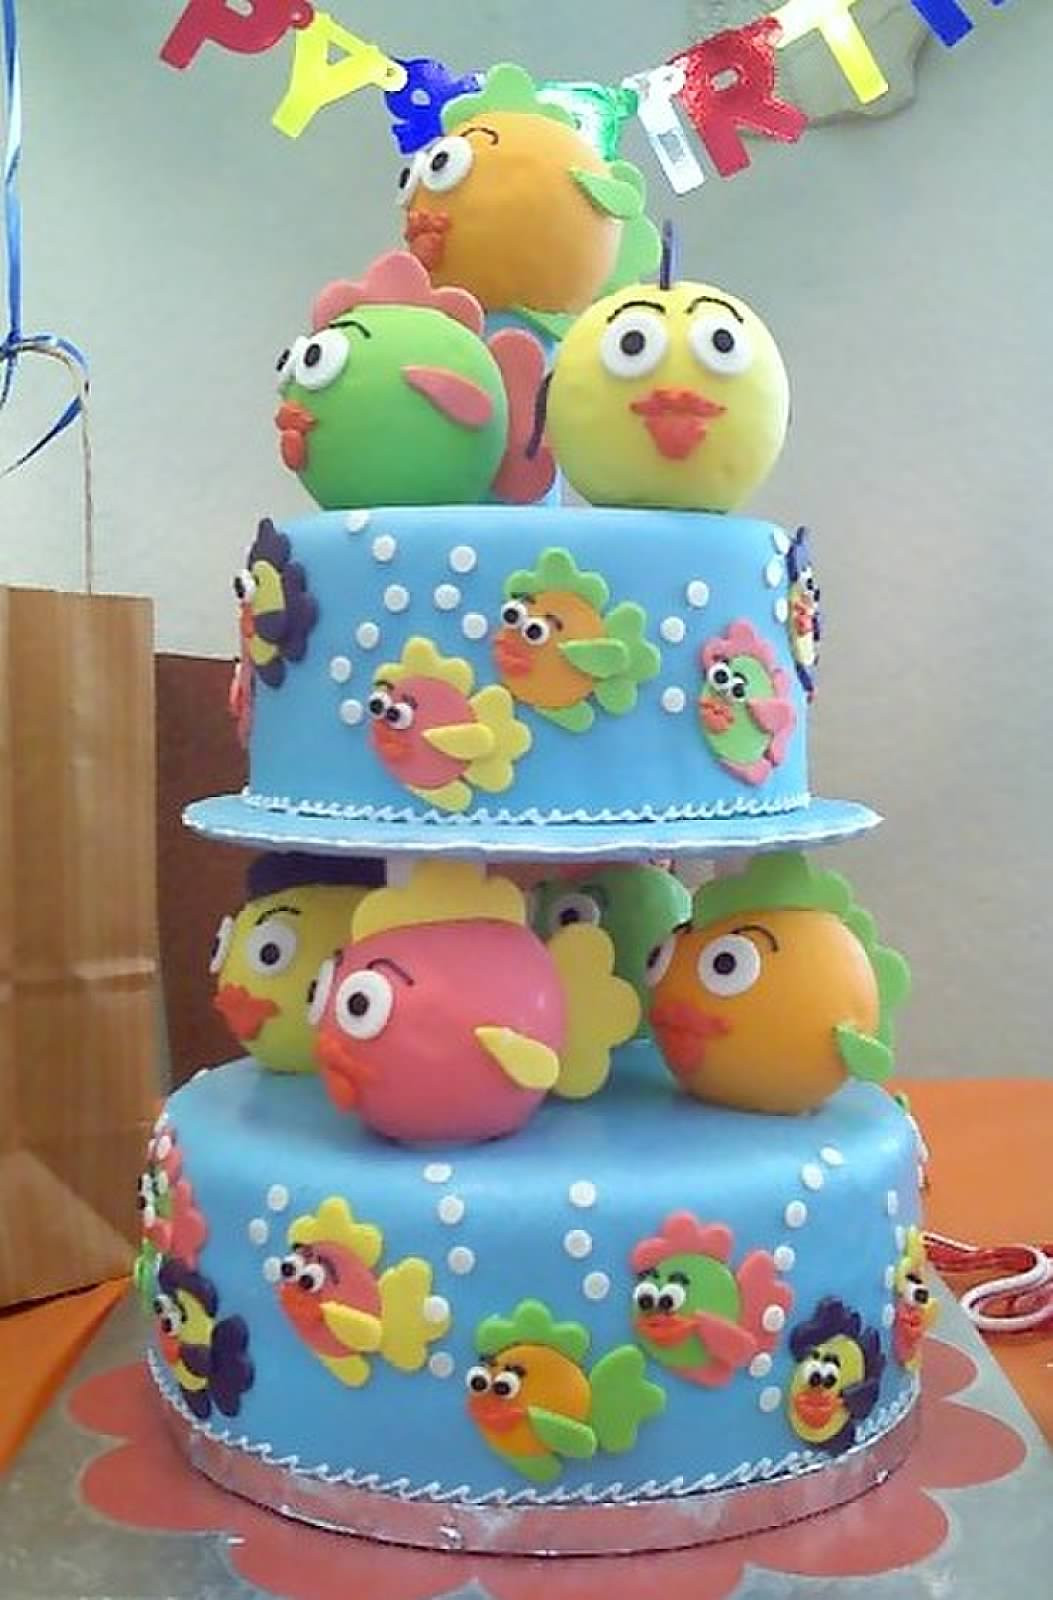 One Year Old Birthday Cake
 File Birthday cake for one year old Wikimedia mons